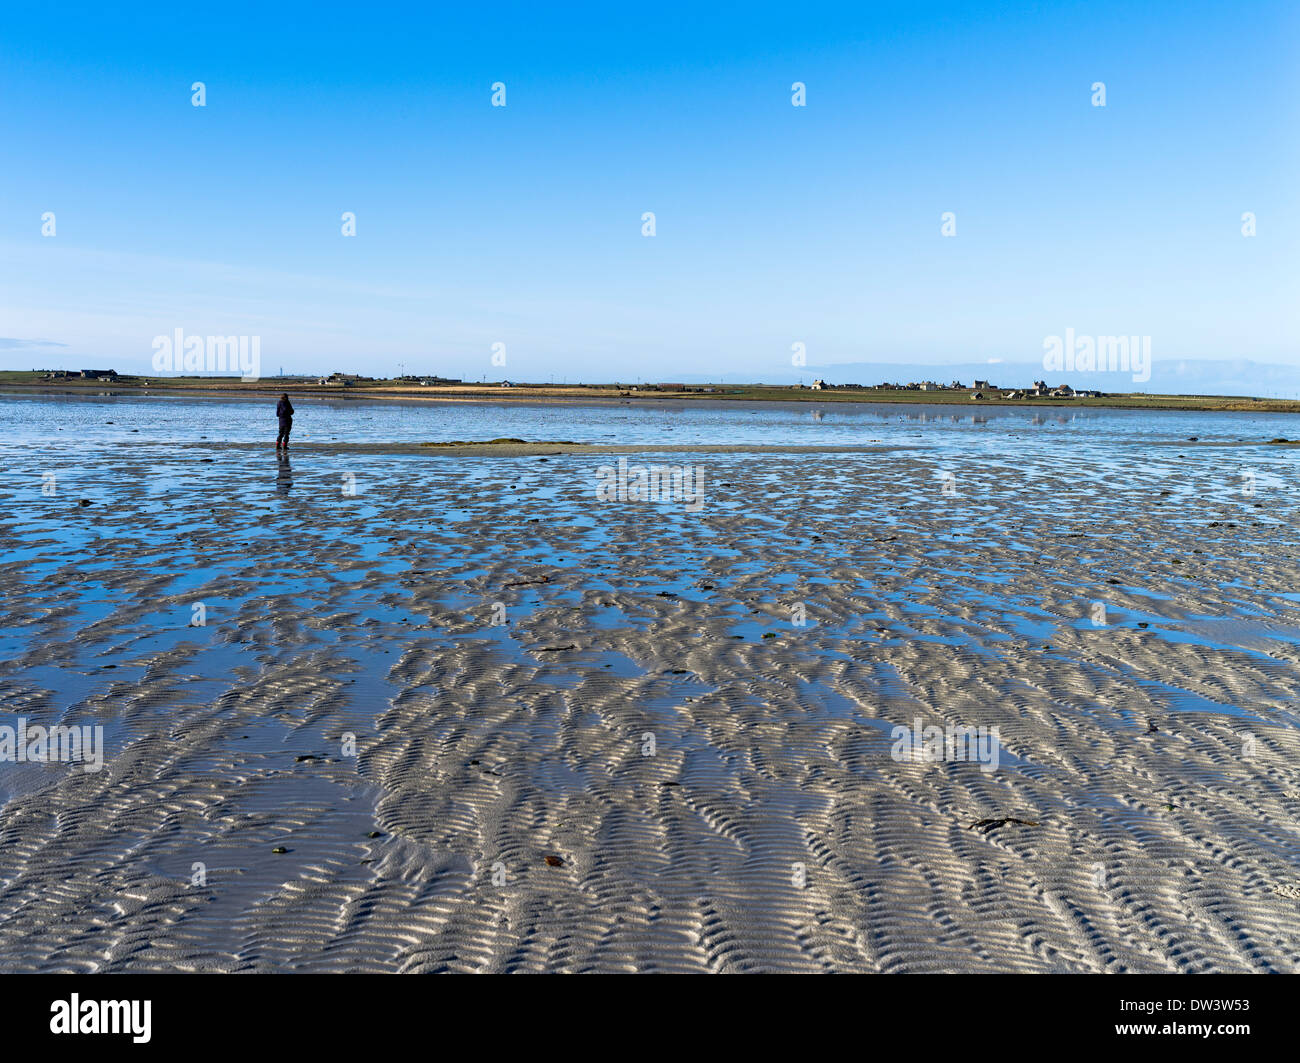 dh Cata Sand SANDAY ORKNEY Woman on beach sand patterns tide out shallow sandy inlet bay Stock Photo